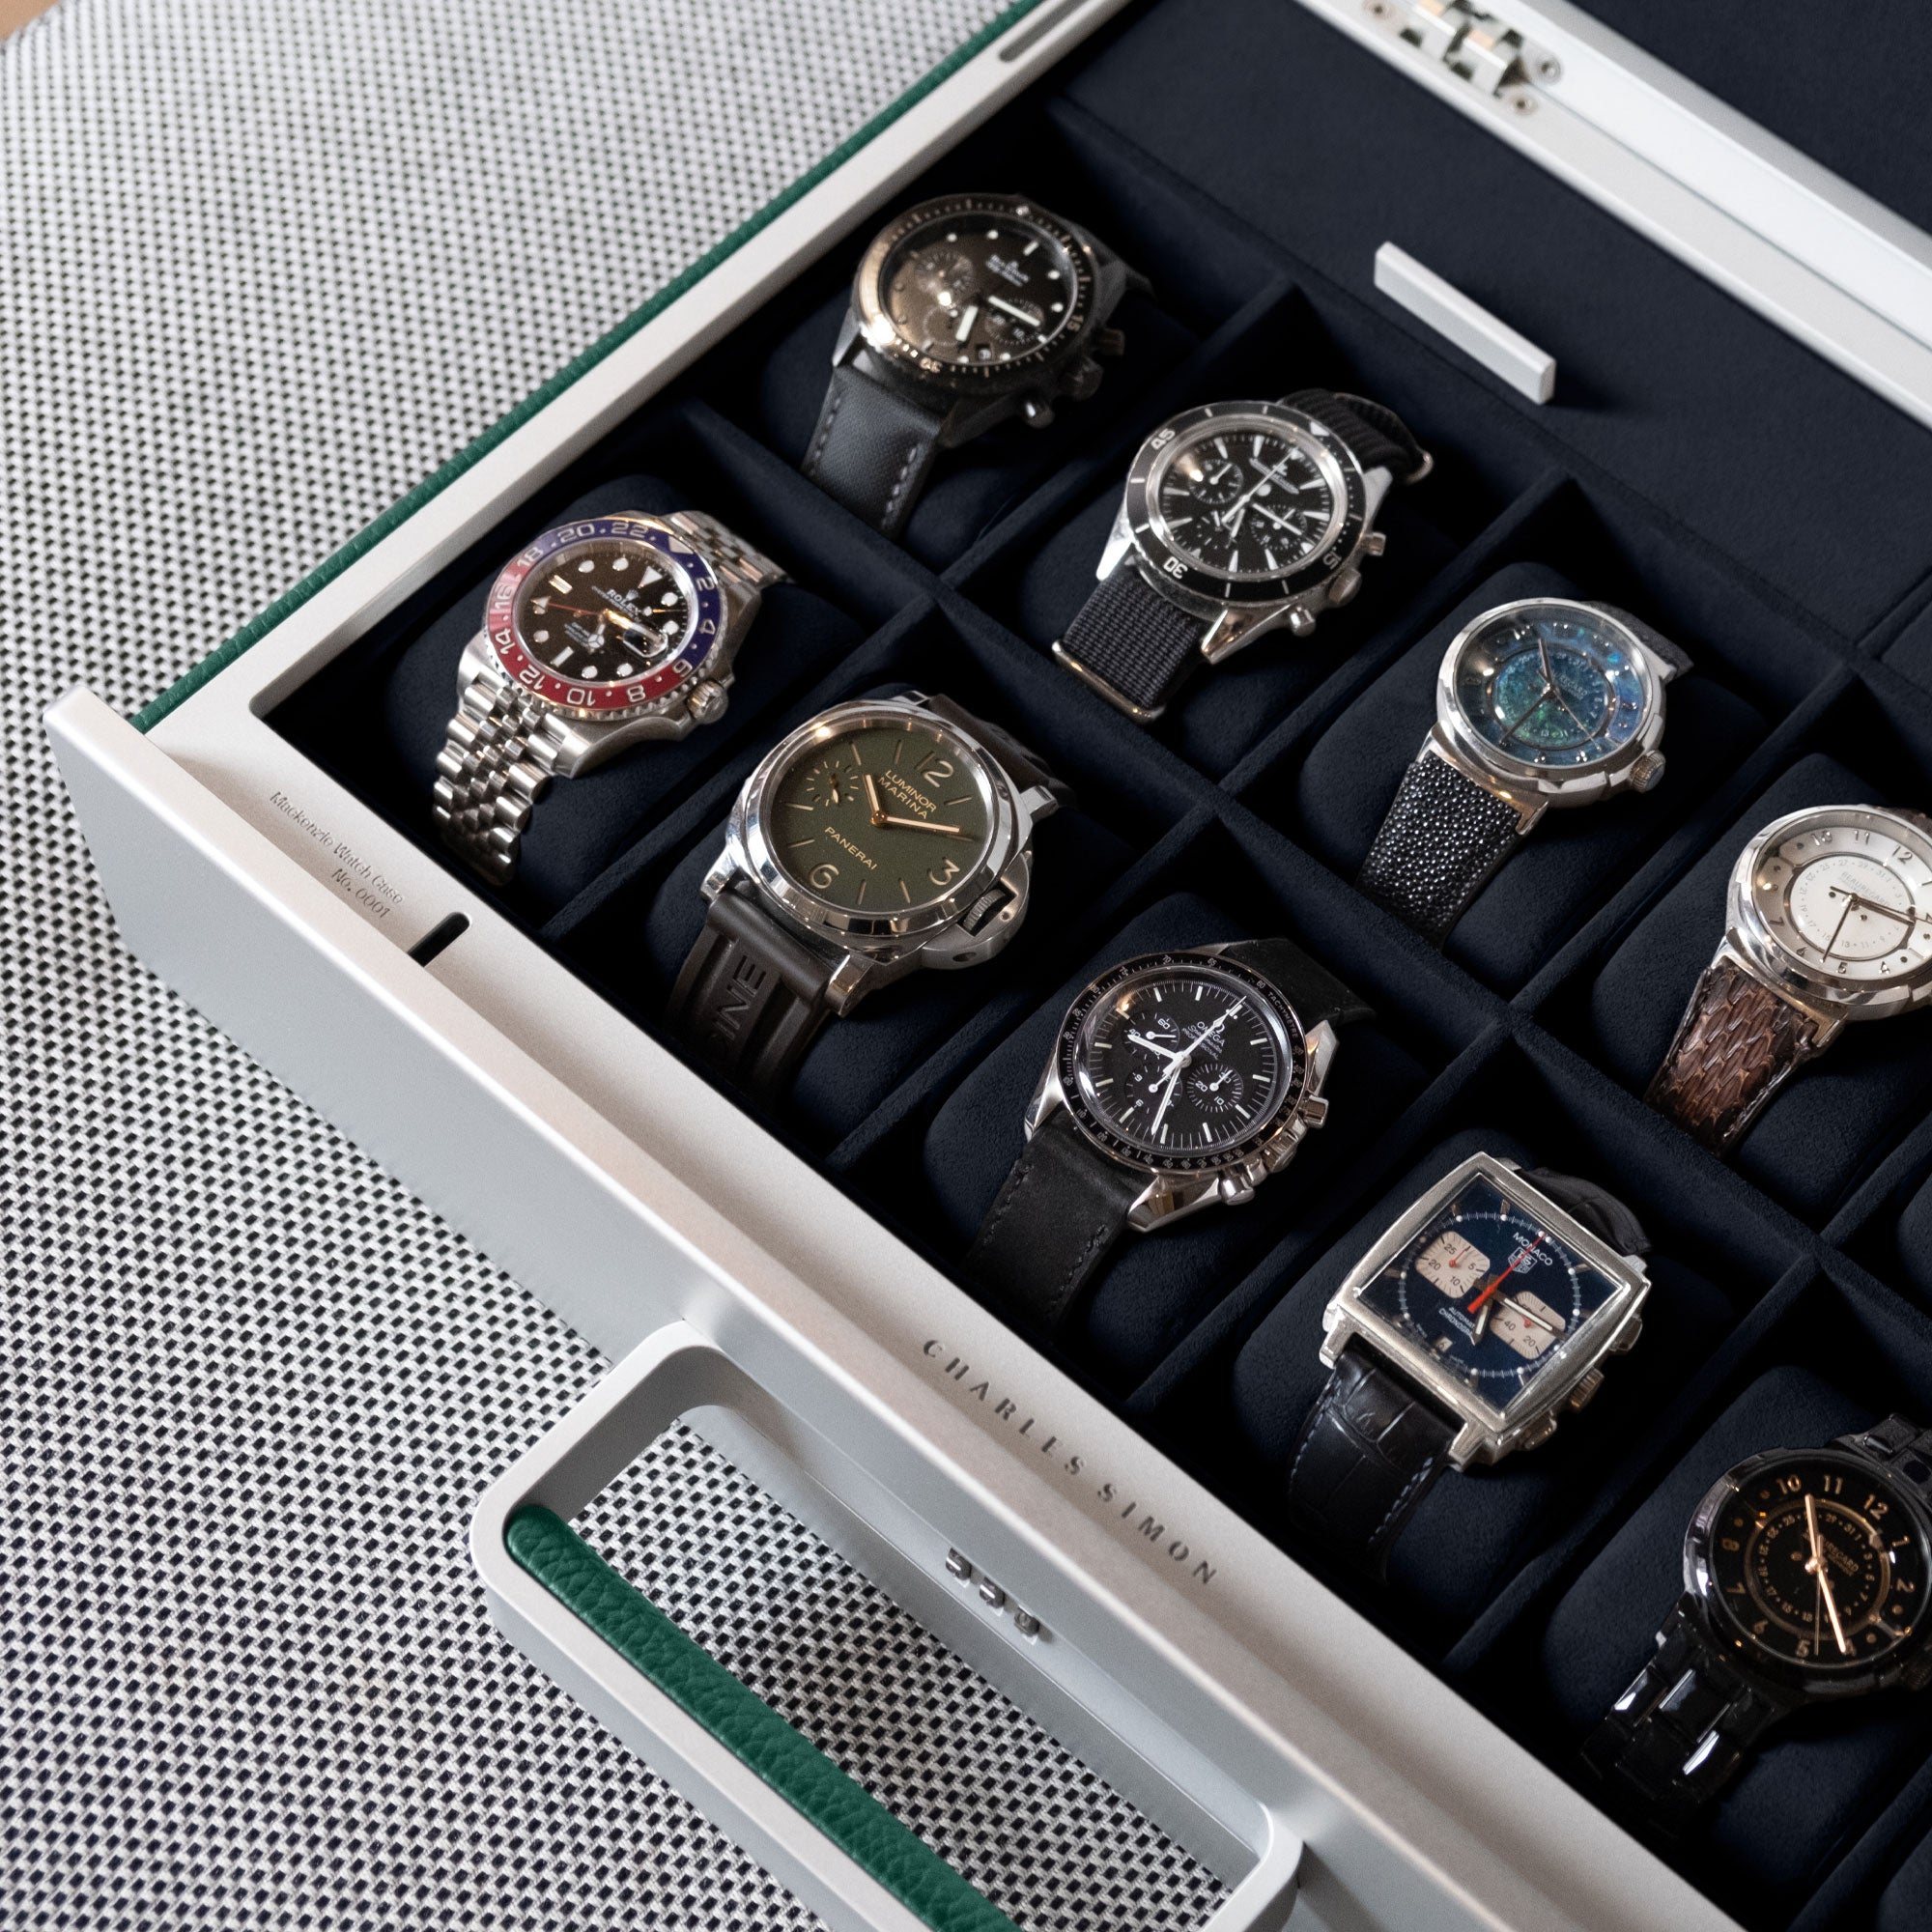 Lifestyle shot of emerald Mackenzie watch briefcase filled with luxury watches including Rolex, Panerai and Omega